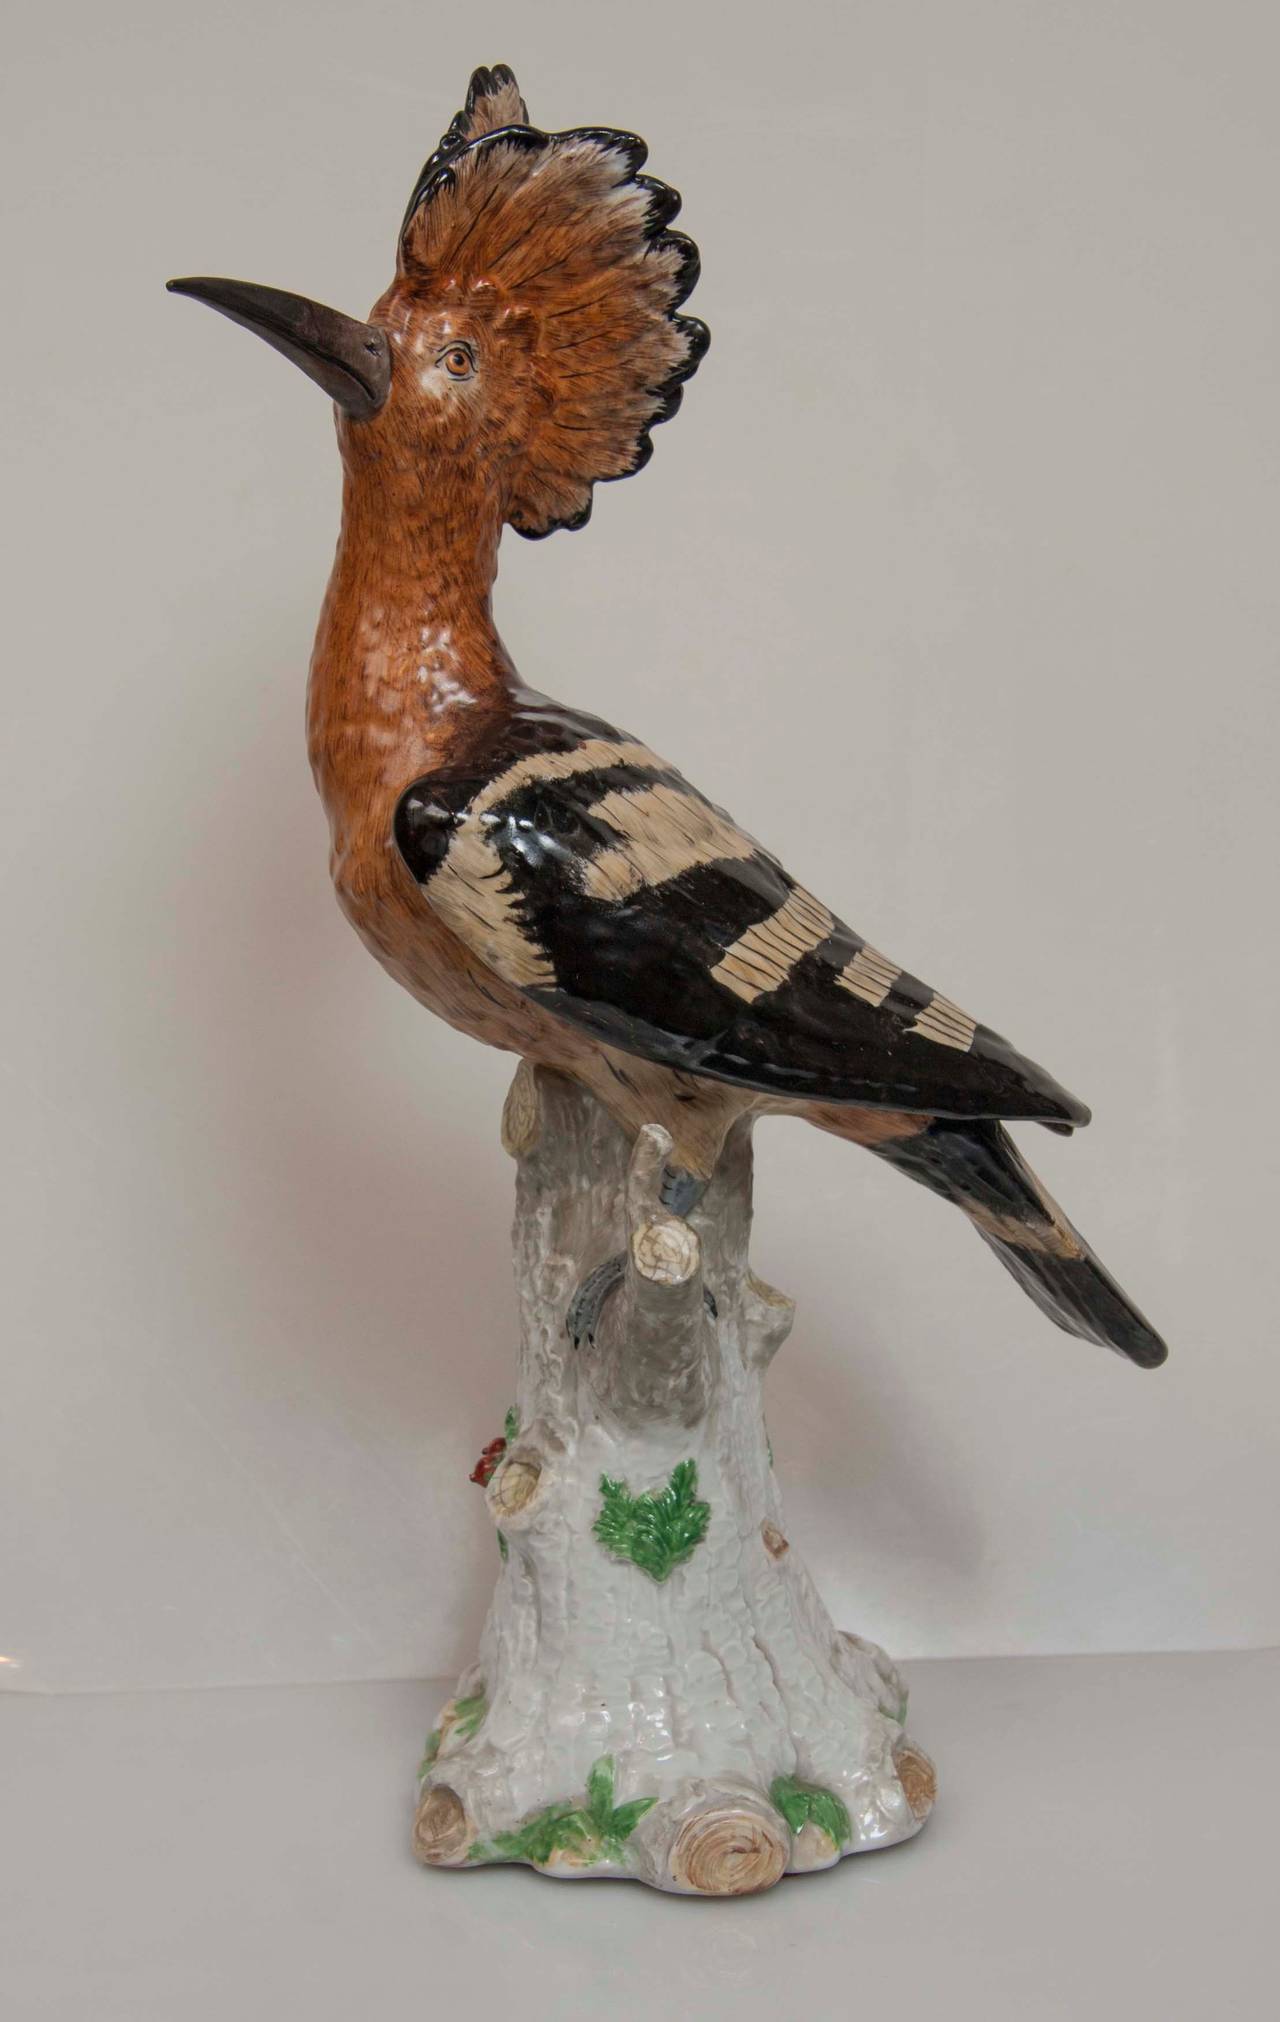 A porcelain hoopoe bird in the manner of Kaendler/Meissen by the Carl Thieme factory in Dresden, Germany. The hoopoe is the national bird of Israel.